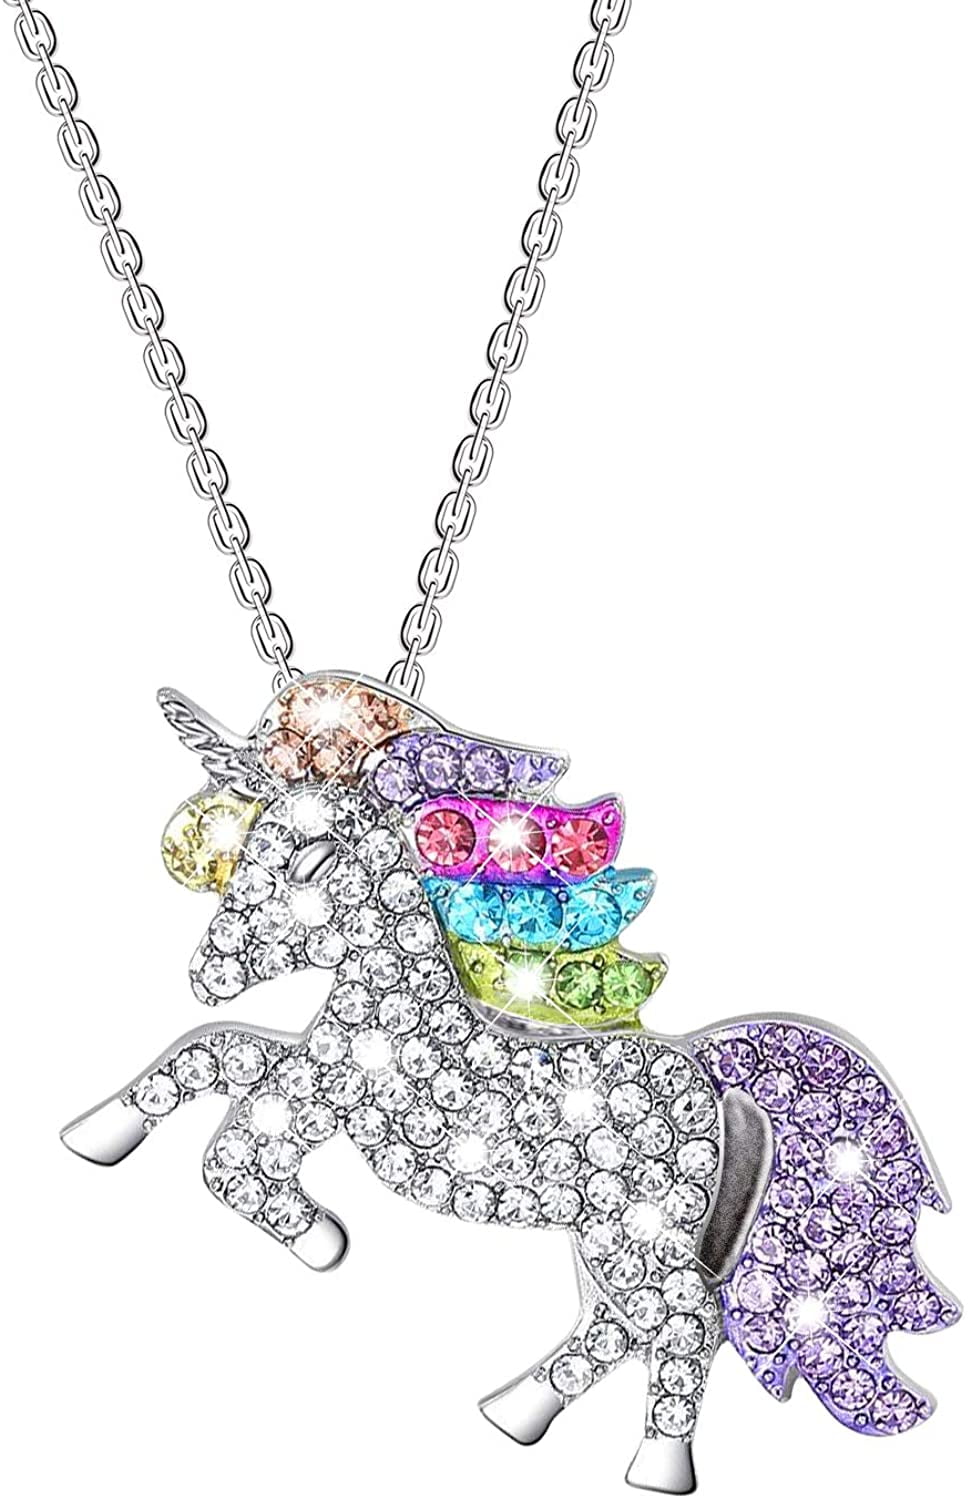 New Unicorn Multi-Colored Crystal Women Girls or Childs Necklace Pendant 